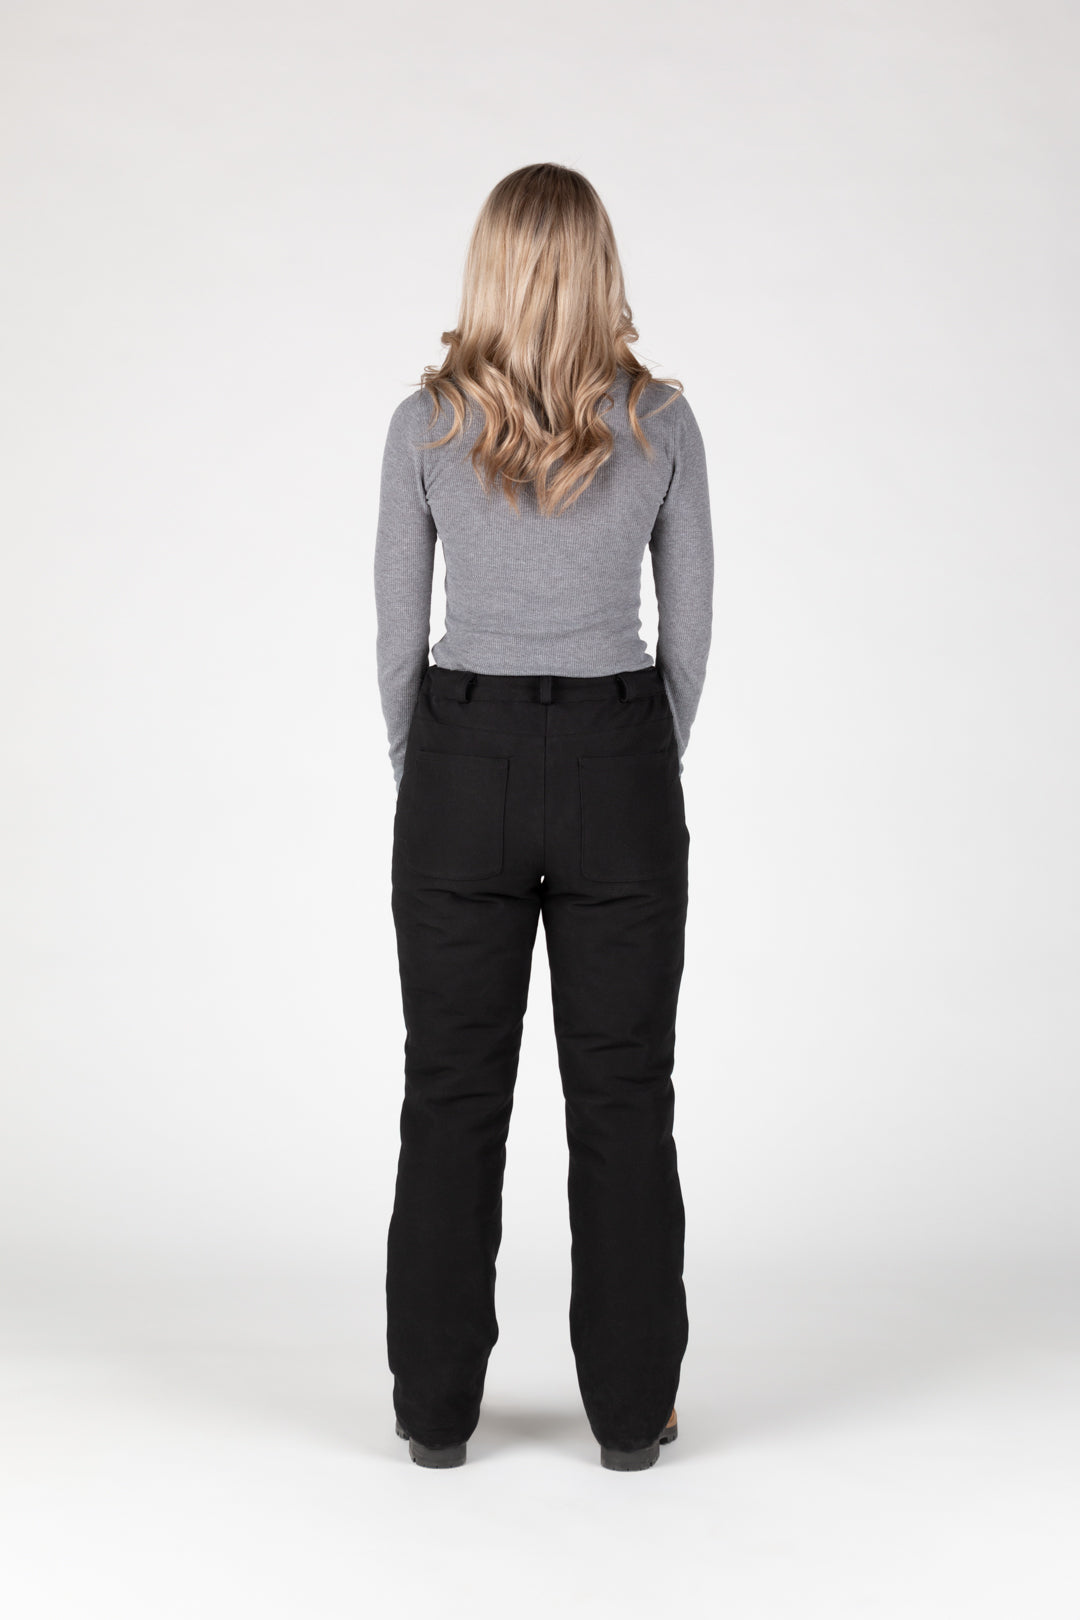 Women's Insulated Work Pants – Rolling D Workwear